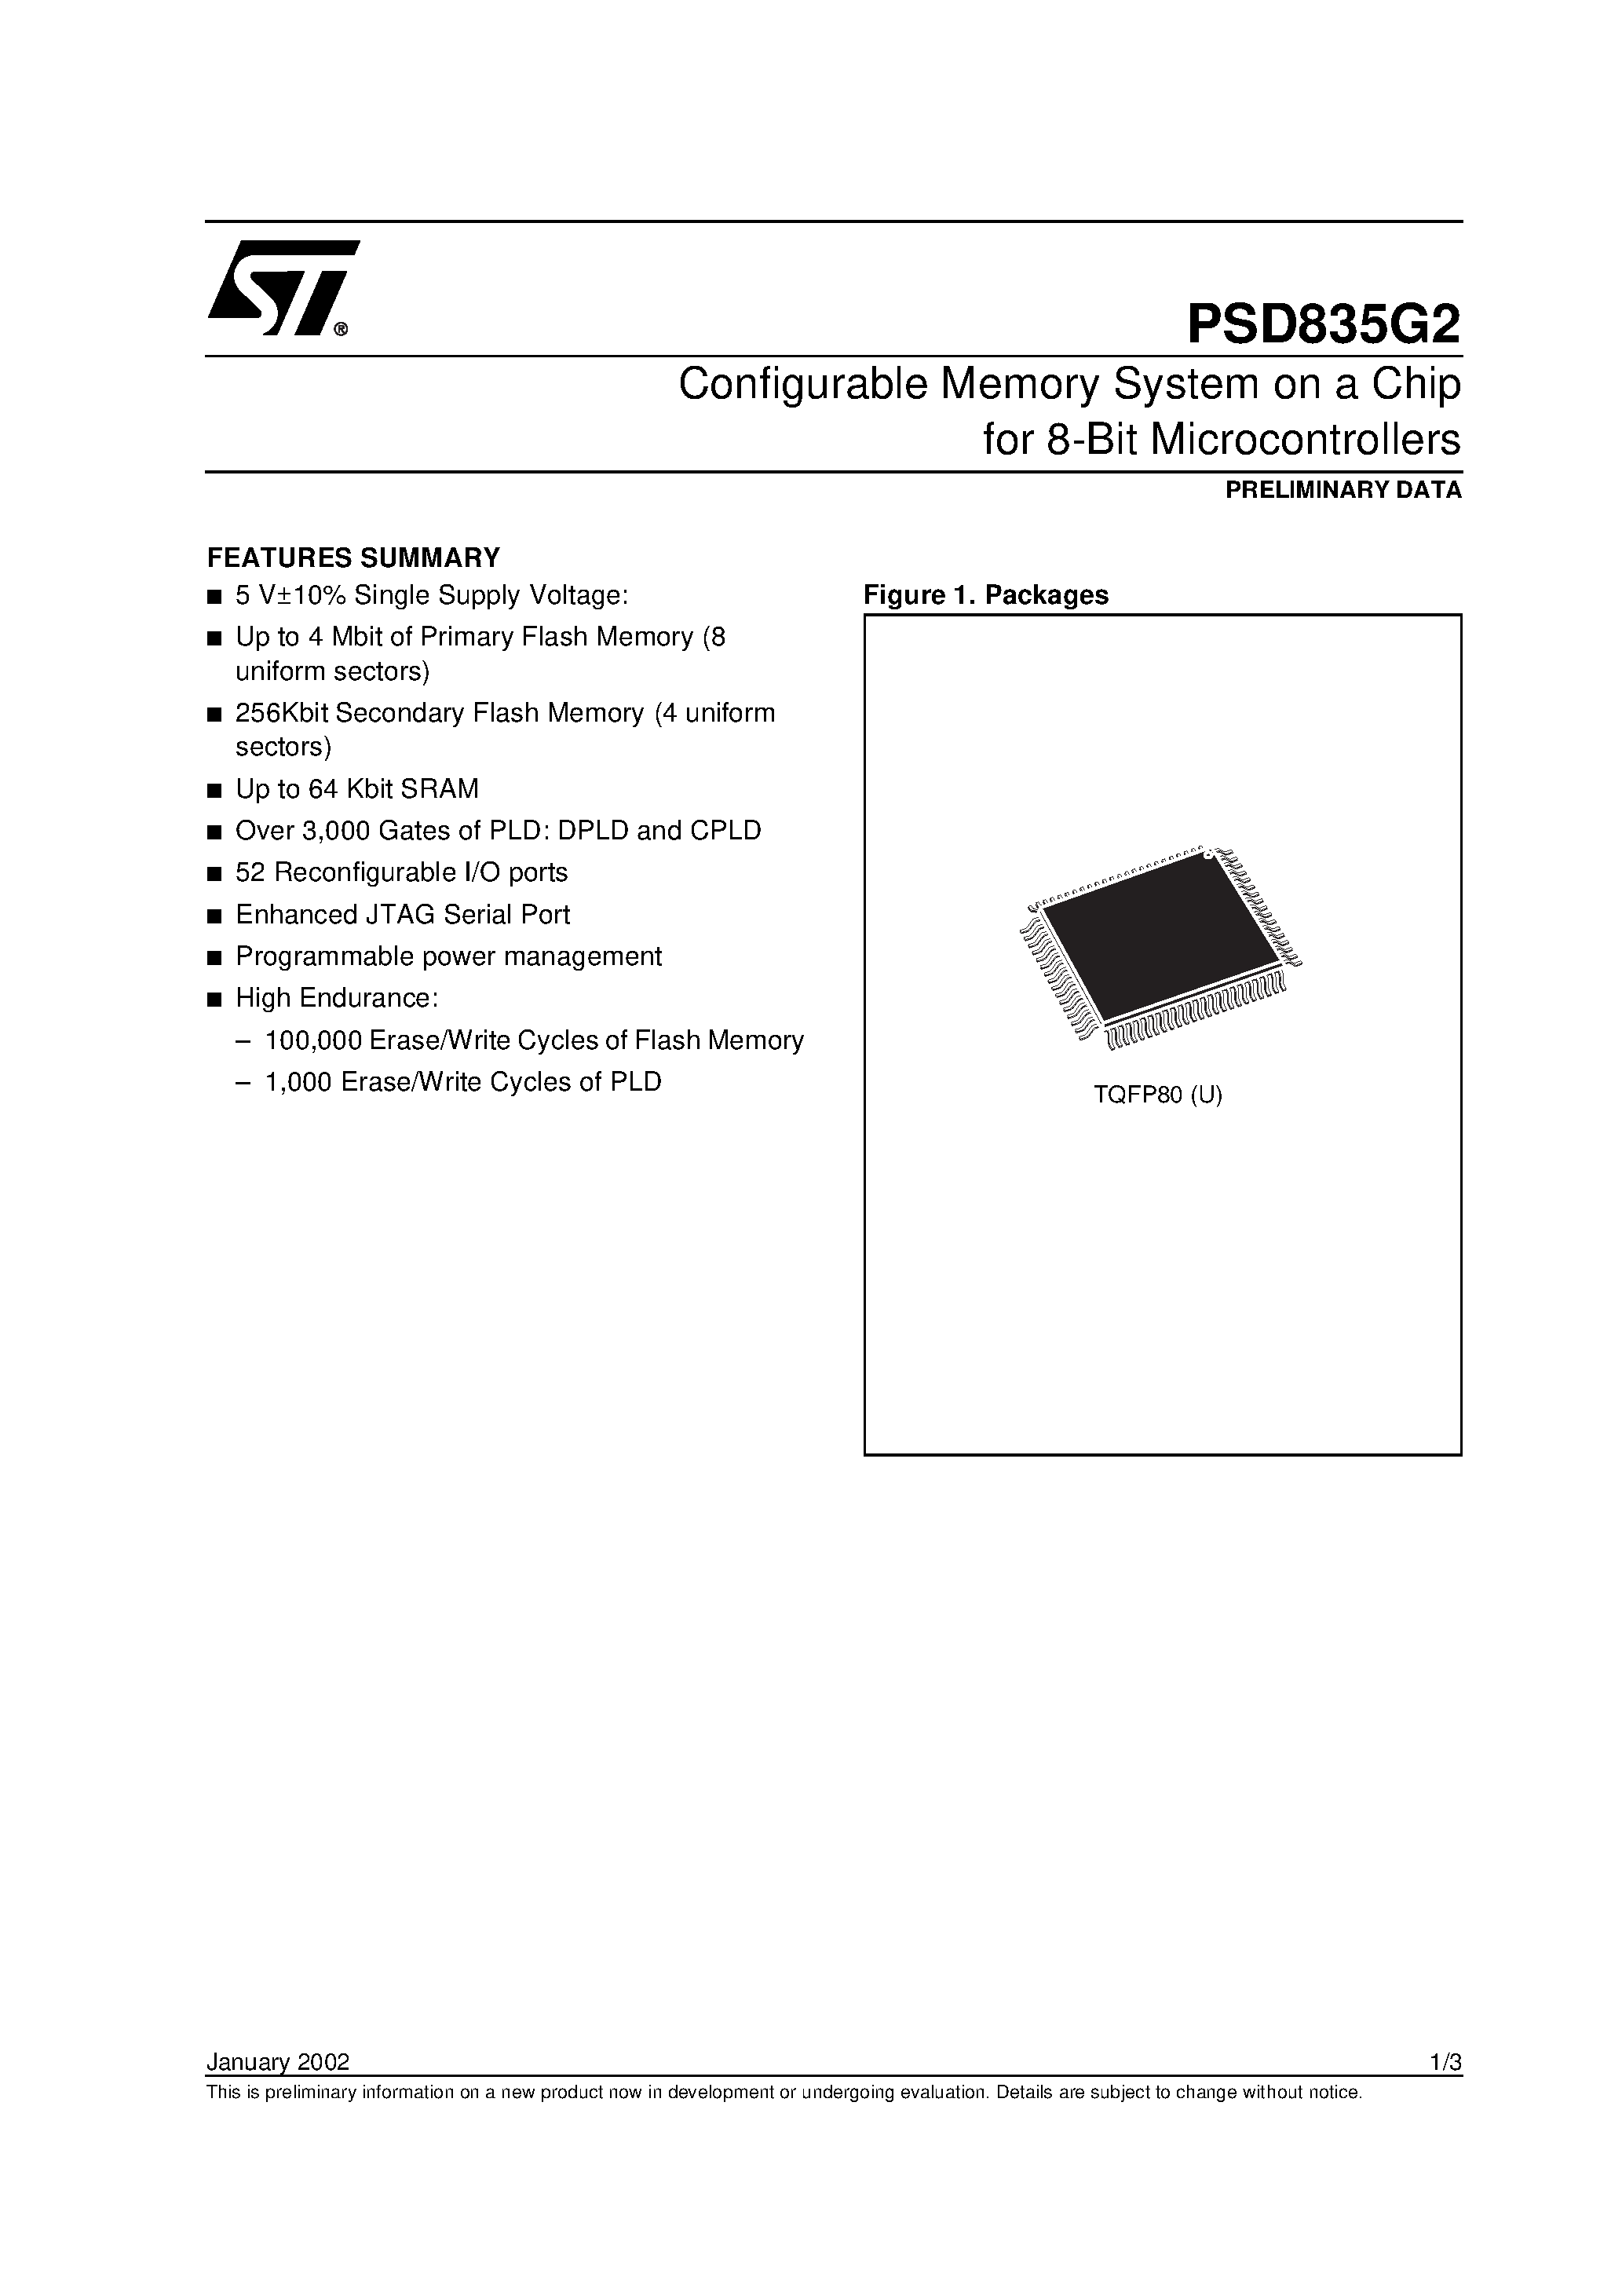 Datasheet PSD835F2-A-90B81I - Configurable Memory System on a Chip for 8-Bit Microcontrollers page 1